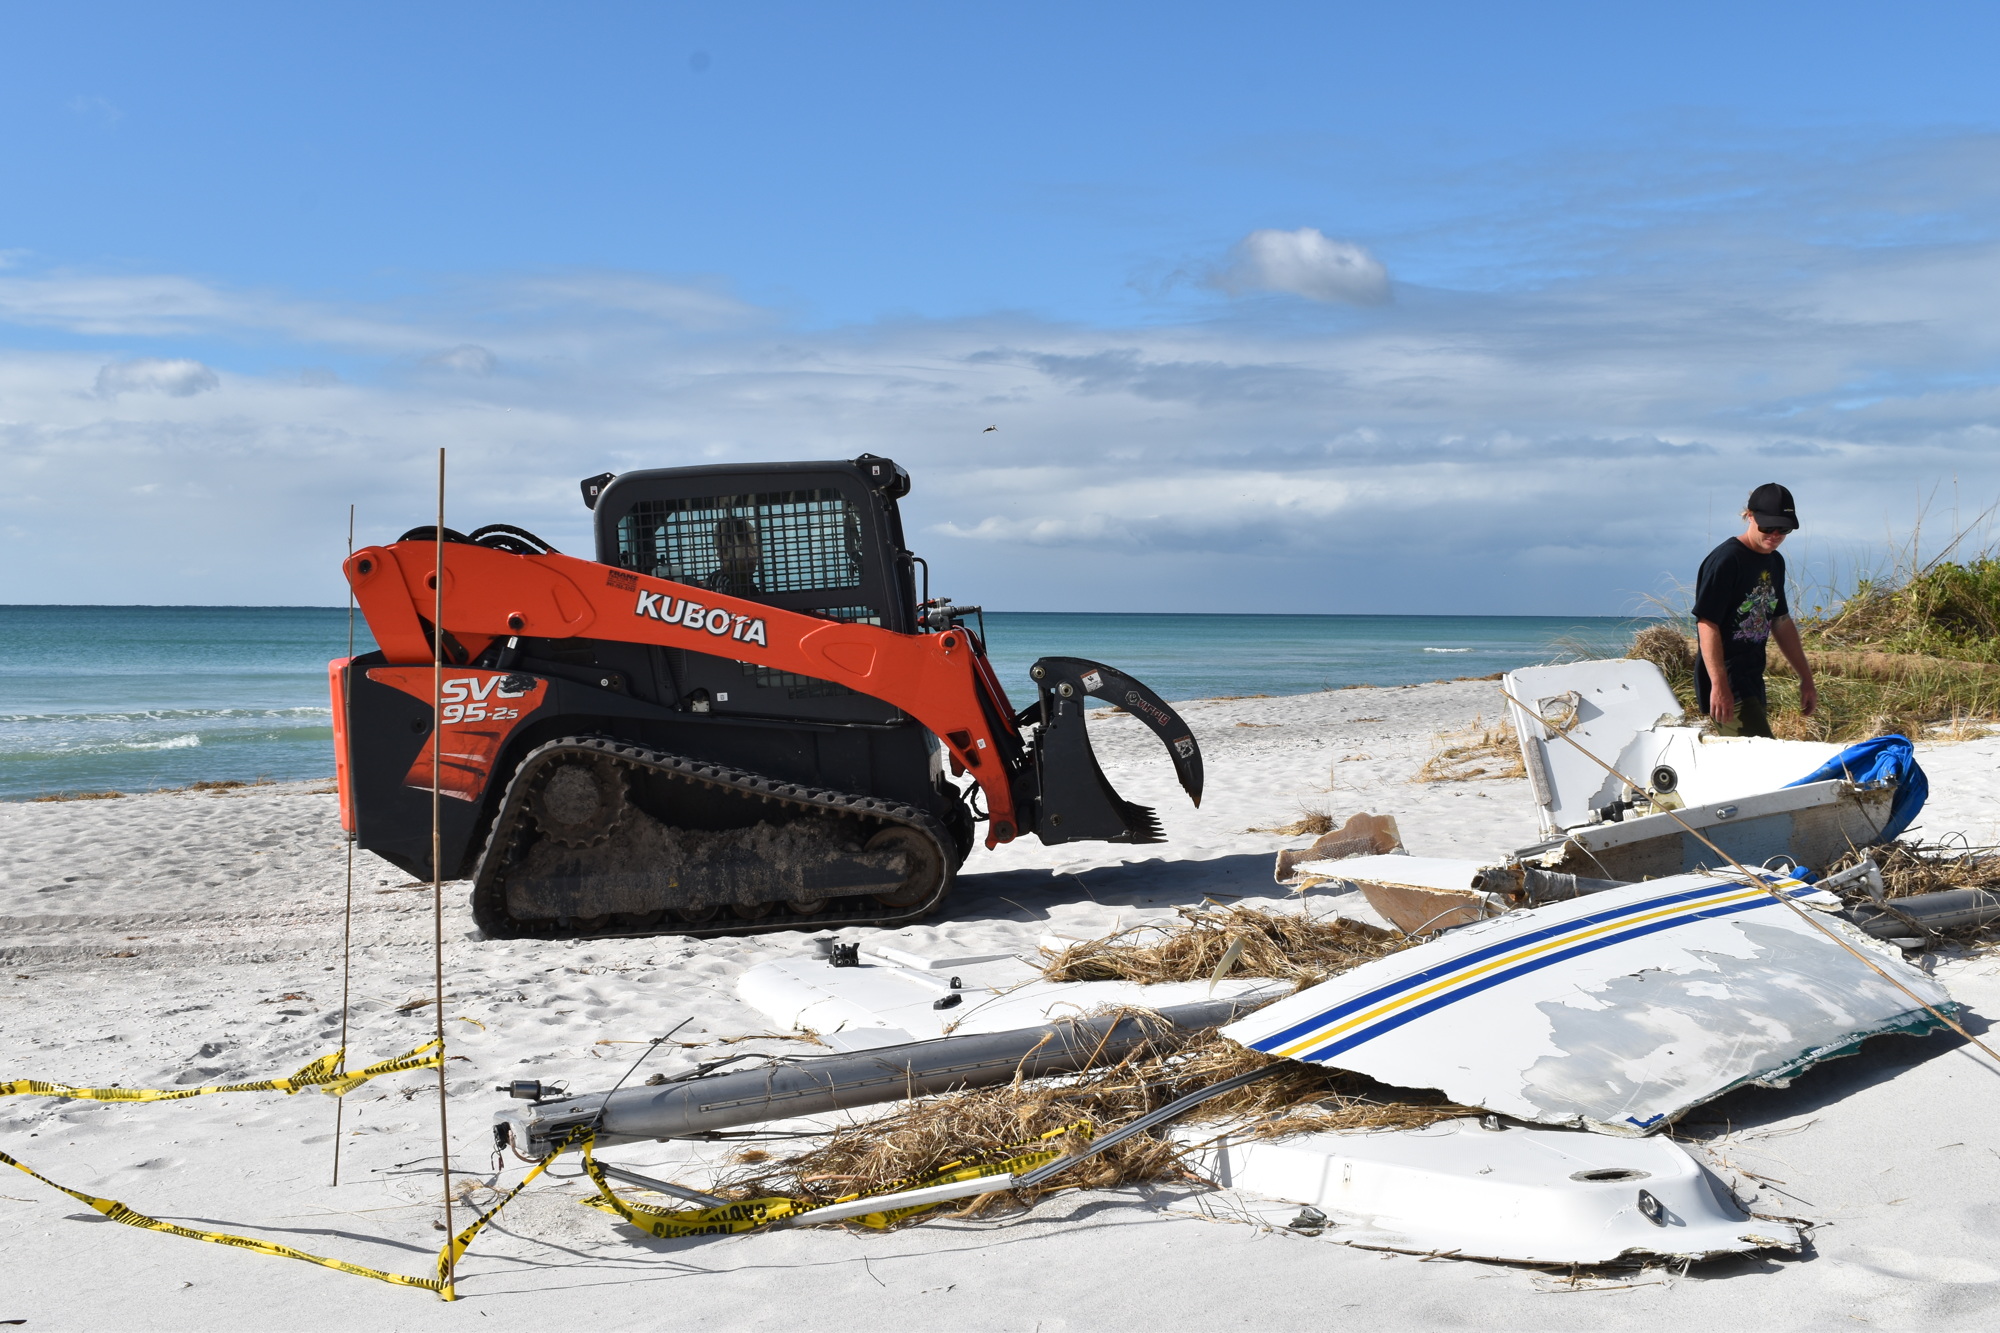 Sea Tow owner Duke Overstreet operates a Kubota skid steer to dismantle the sailboat debris that washed ashore. Sea Tow employee York Graham looks on.